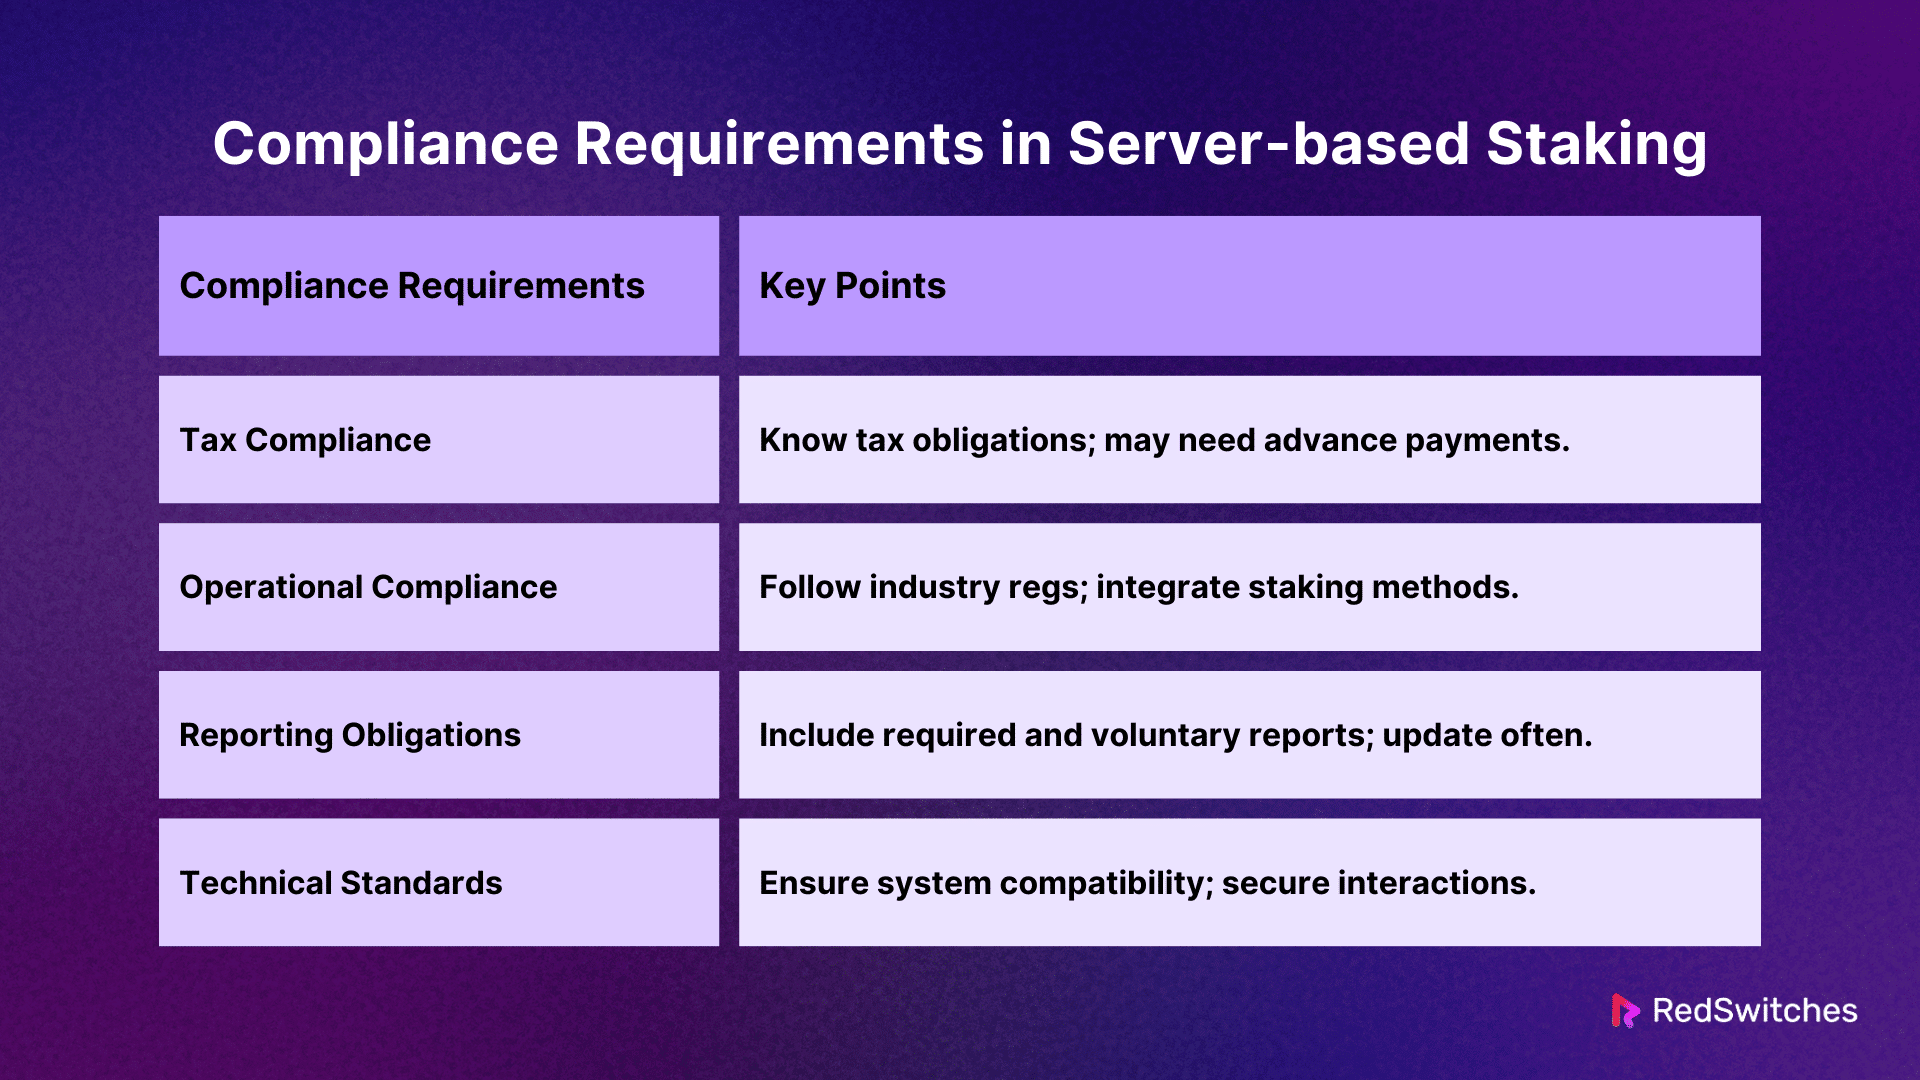 Other Compliance Requirements in Server-based Staking